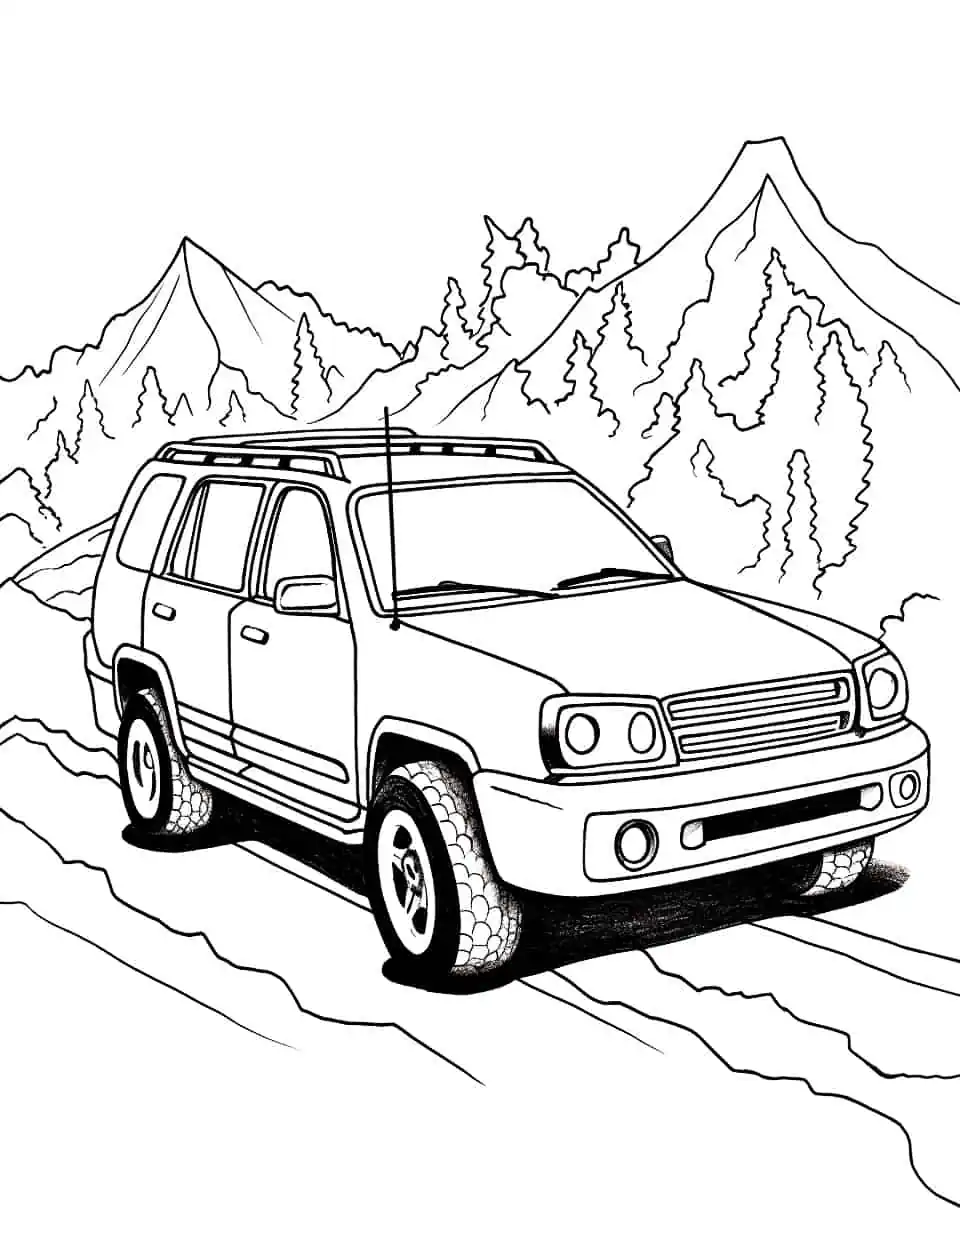 The Great SUV Expedition Car Coloring Page - An SUV on a thrilling expedition.